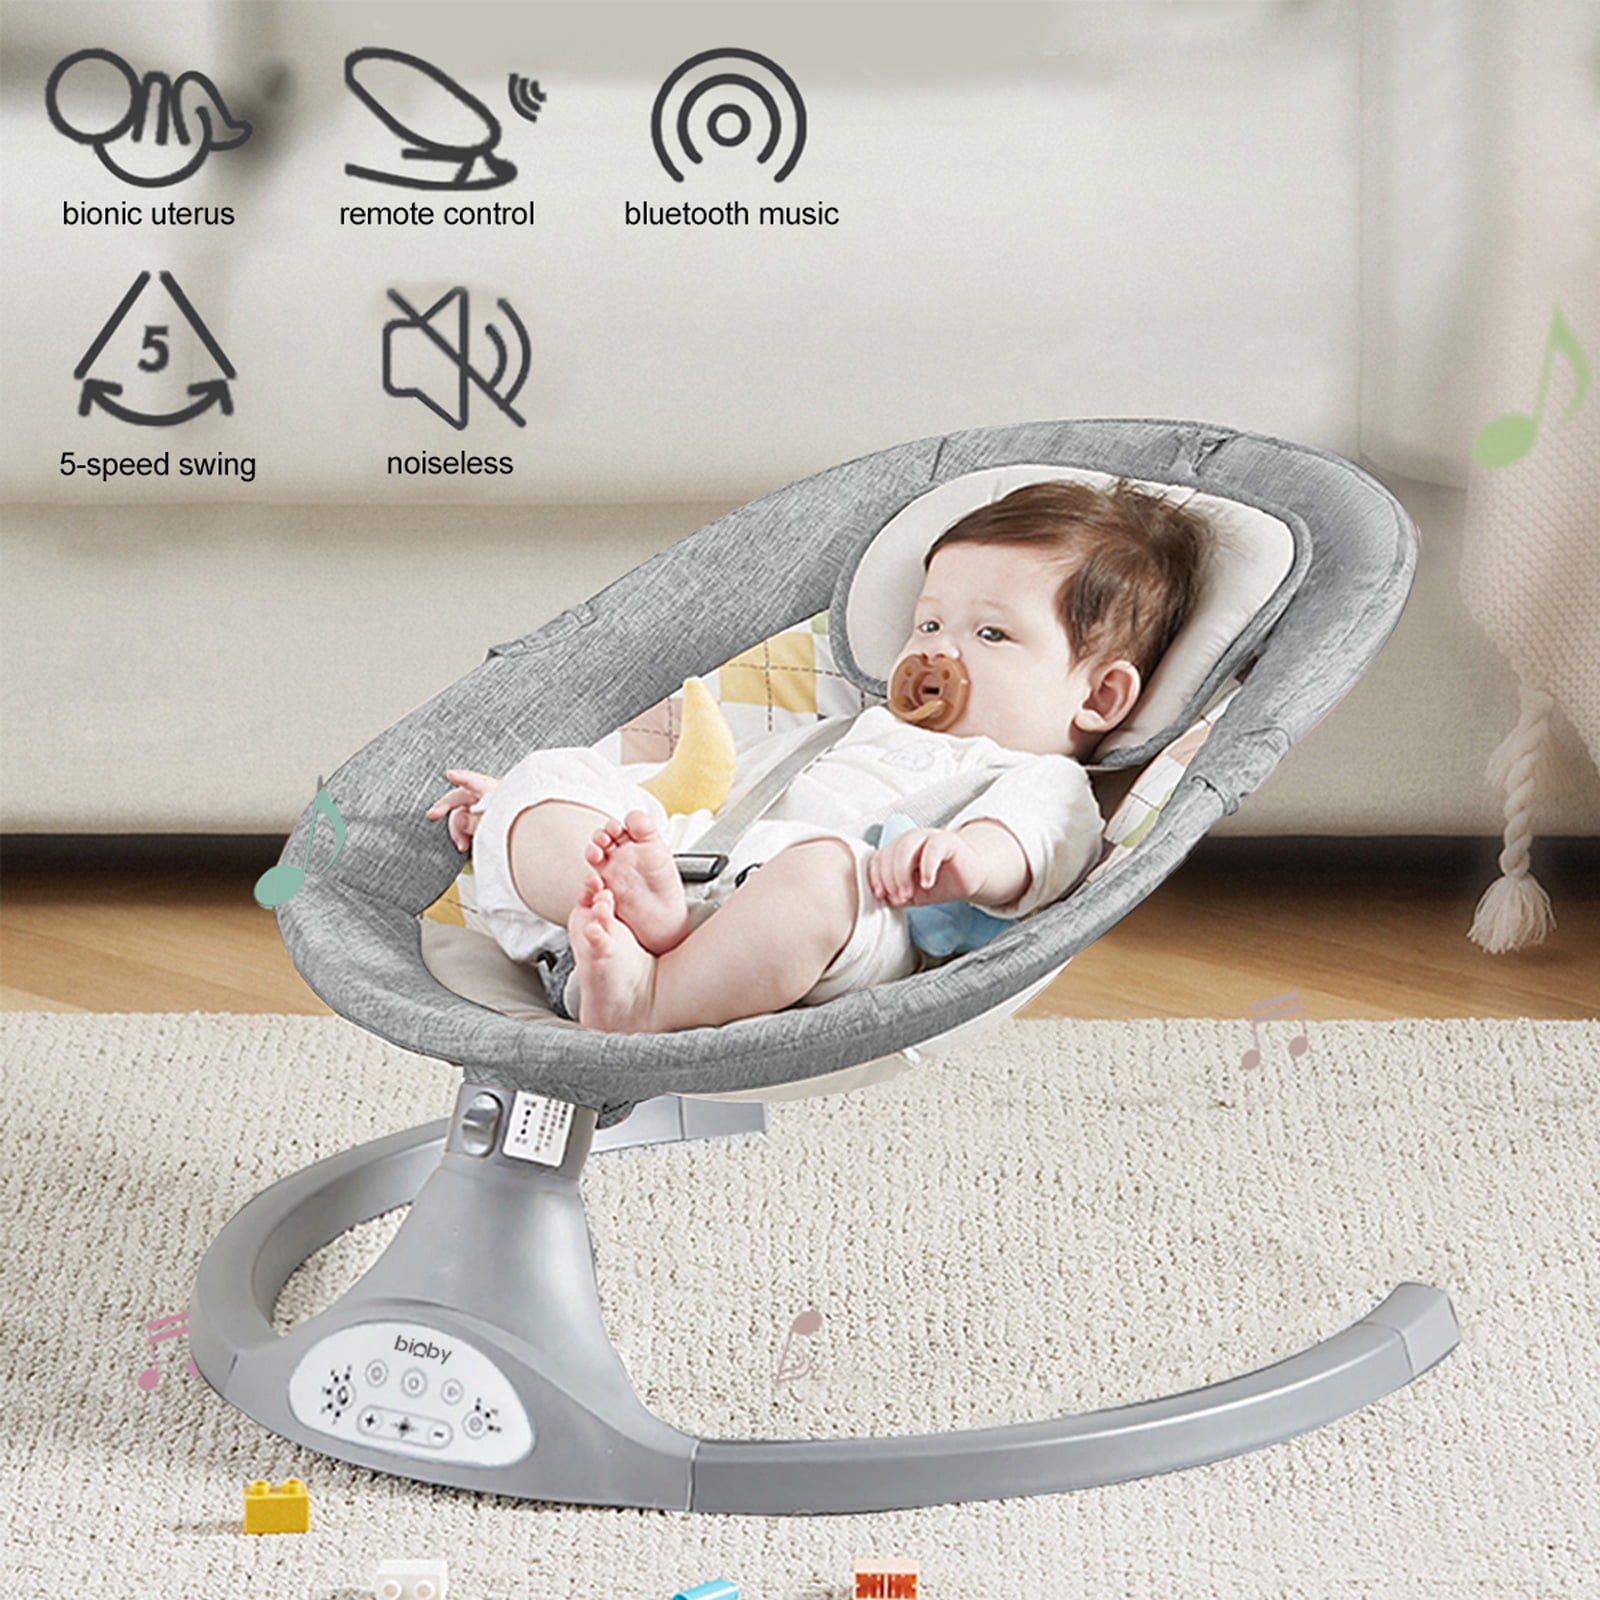 Portable Baby Automatic Swing & Bouncers,Baby Bouncer Seat Rocking Chair for Sitting up with 8 Soothing Music US Fast Shipment, Multicolour Electric Baby Swing Cradle 